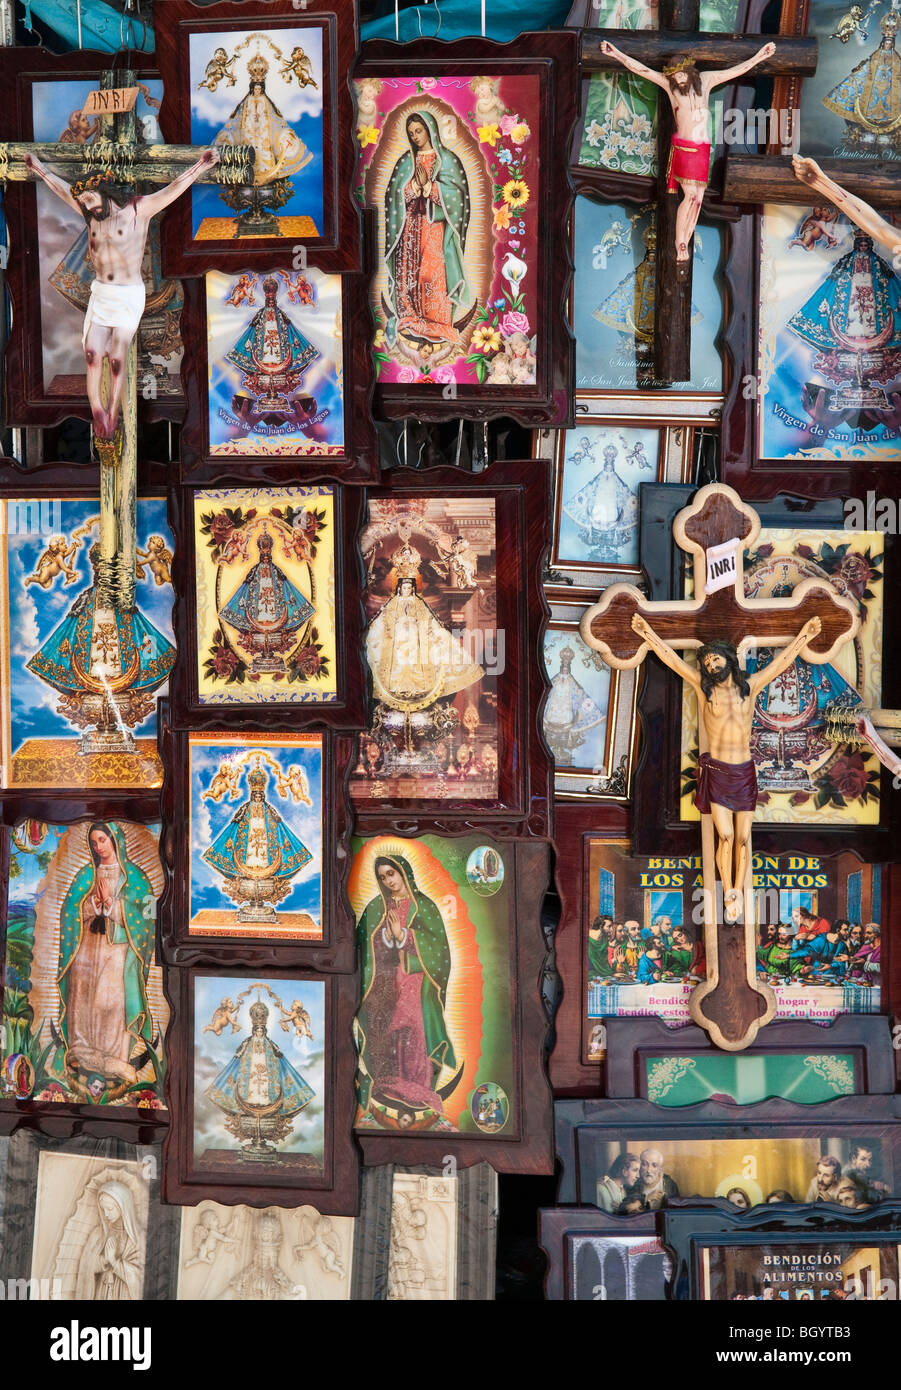 Religious paintings and Christ on the cross figurines for sale in the town of San Juan de los Lagos, Jalisco, Mexico. Stock Photo